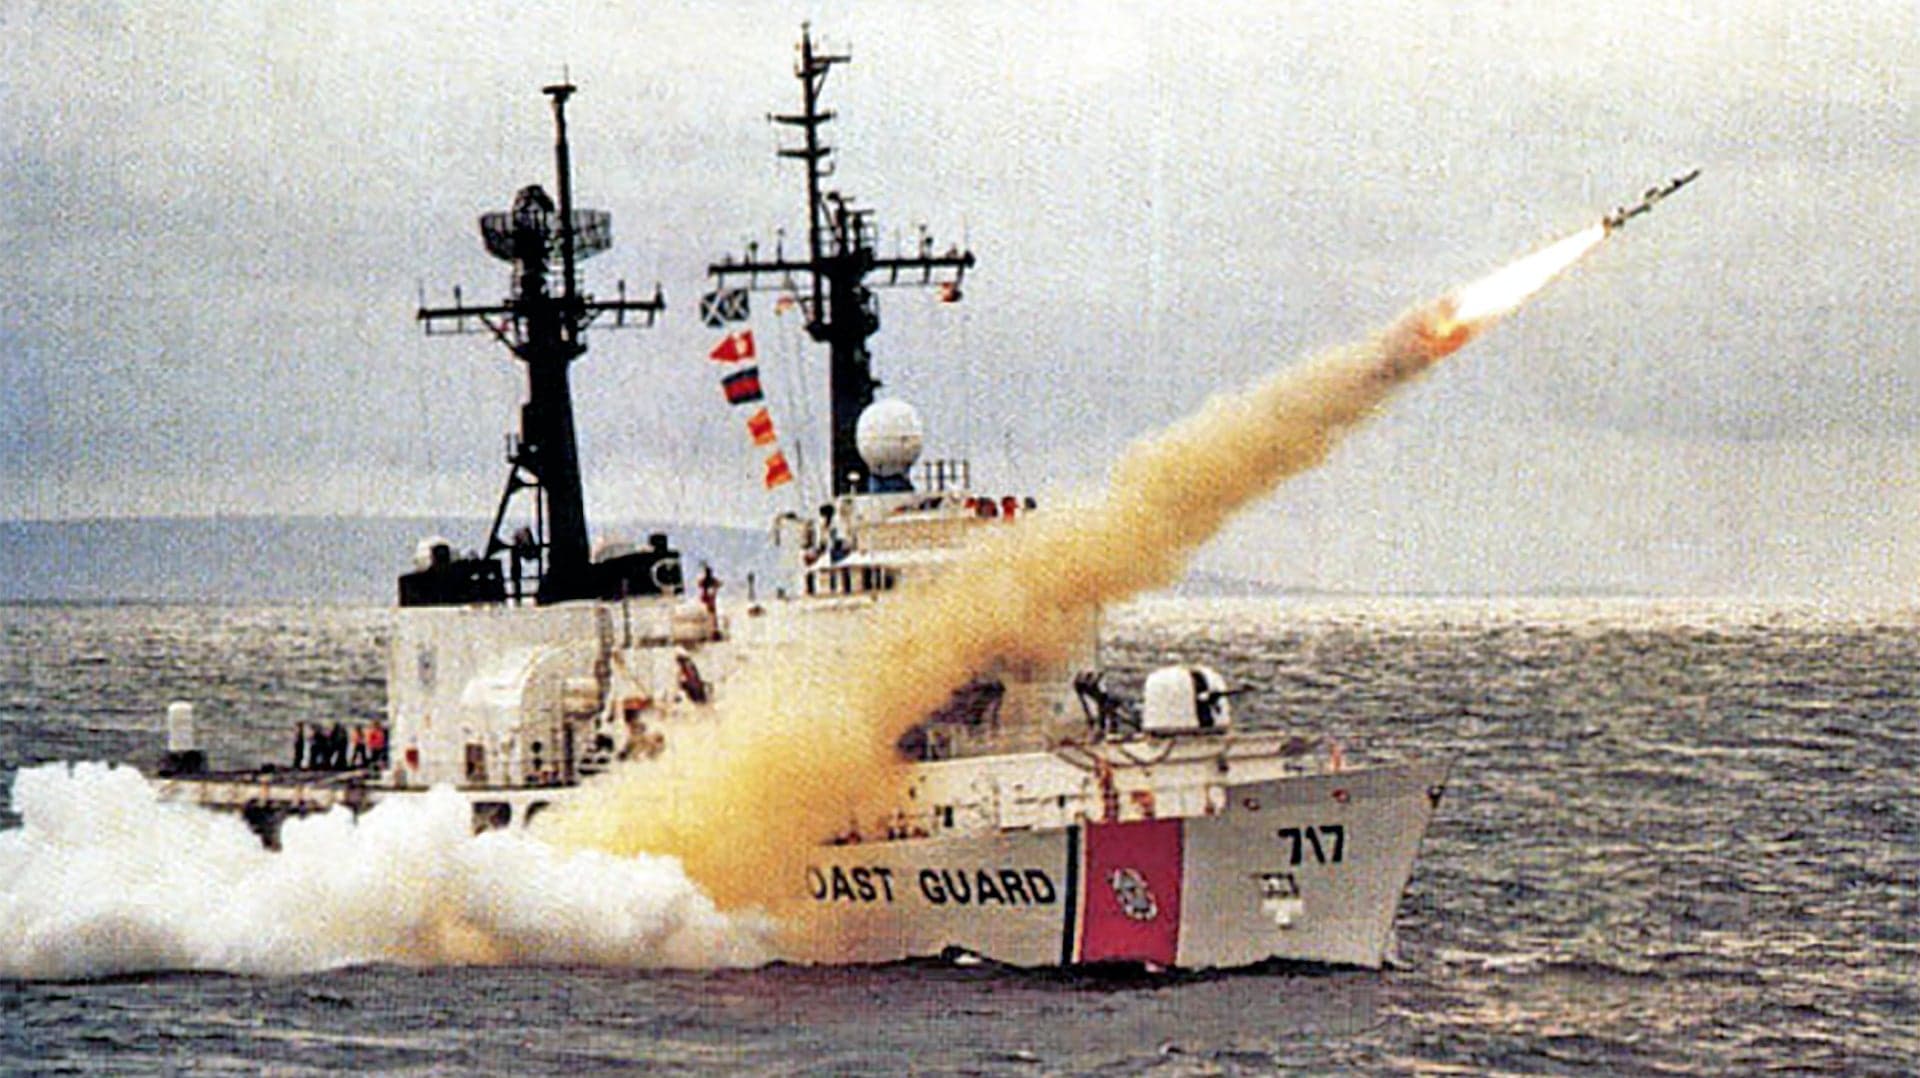 Coast Guard Cutters Once Carried Harpoon Anti-Ship Missiles And They Could Again